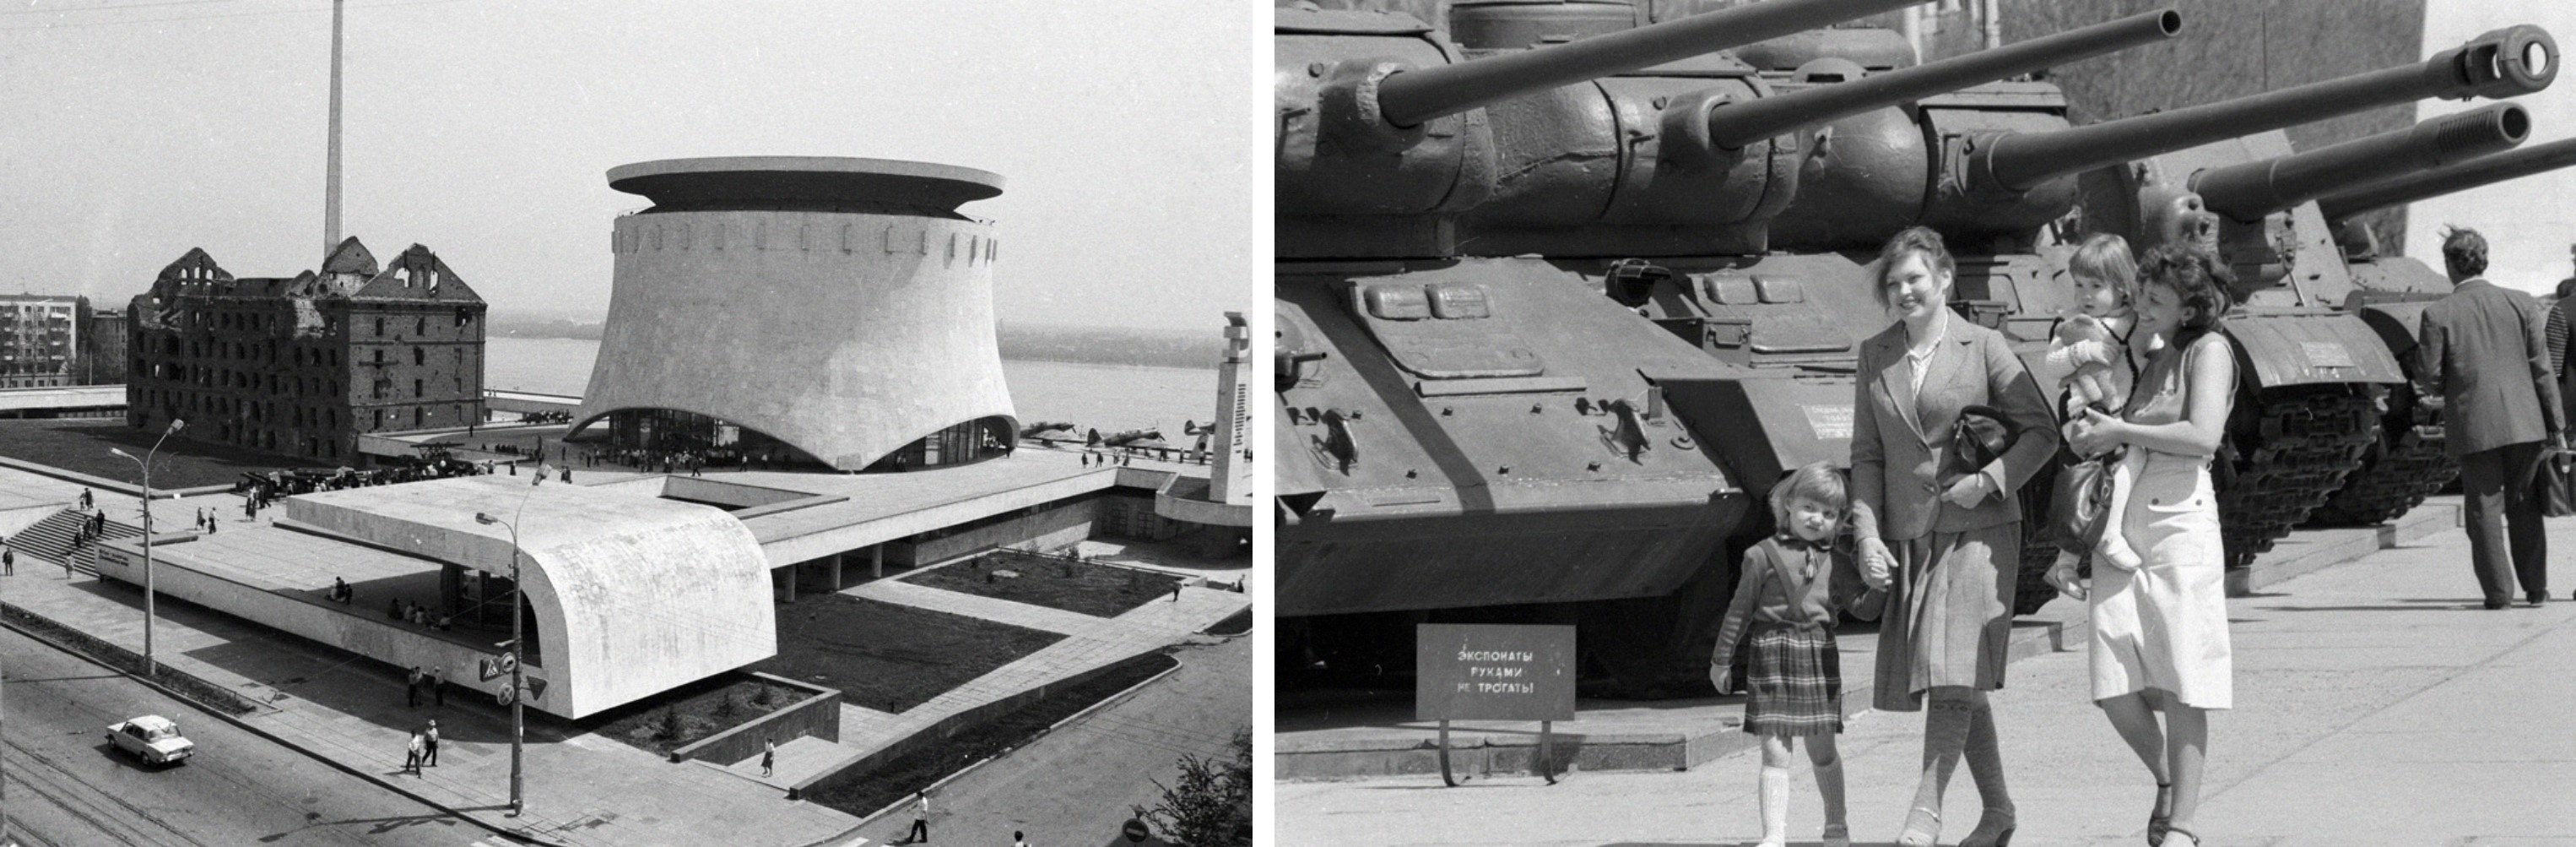 On the left, the building of the Memorial Museum-Panorama. On the right, visitors passing by armored vehicles outside the museum.